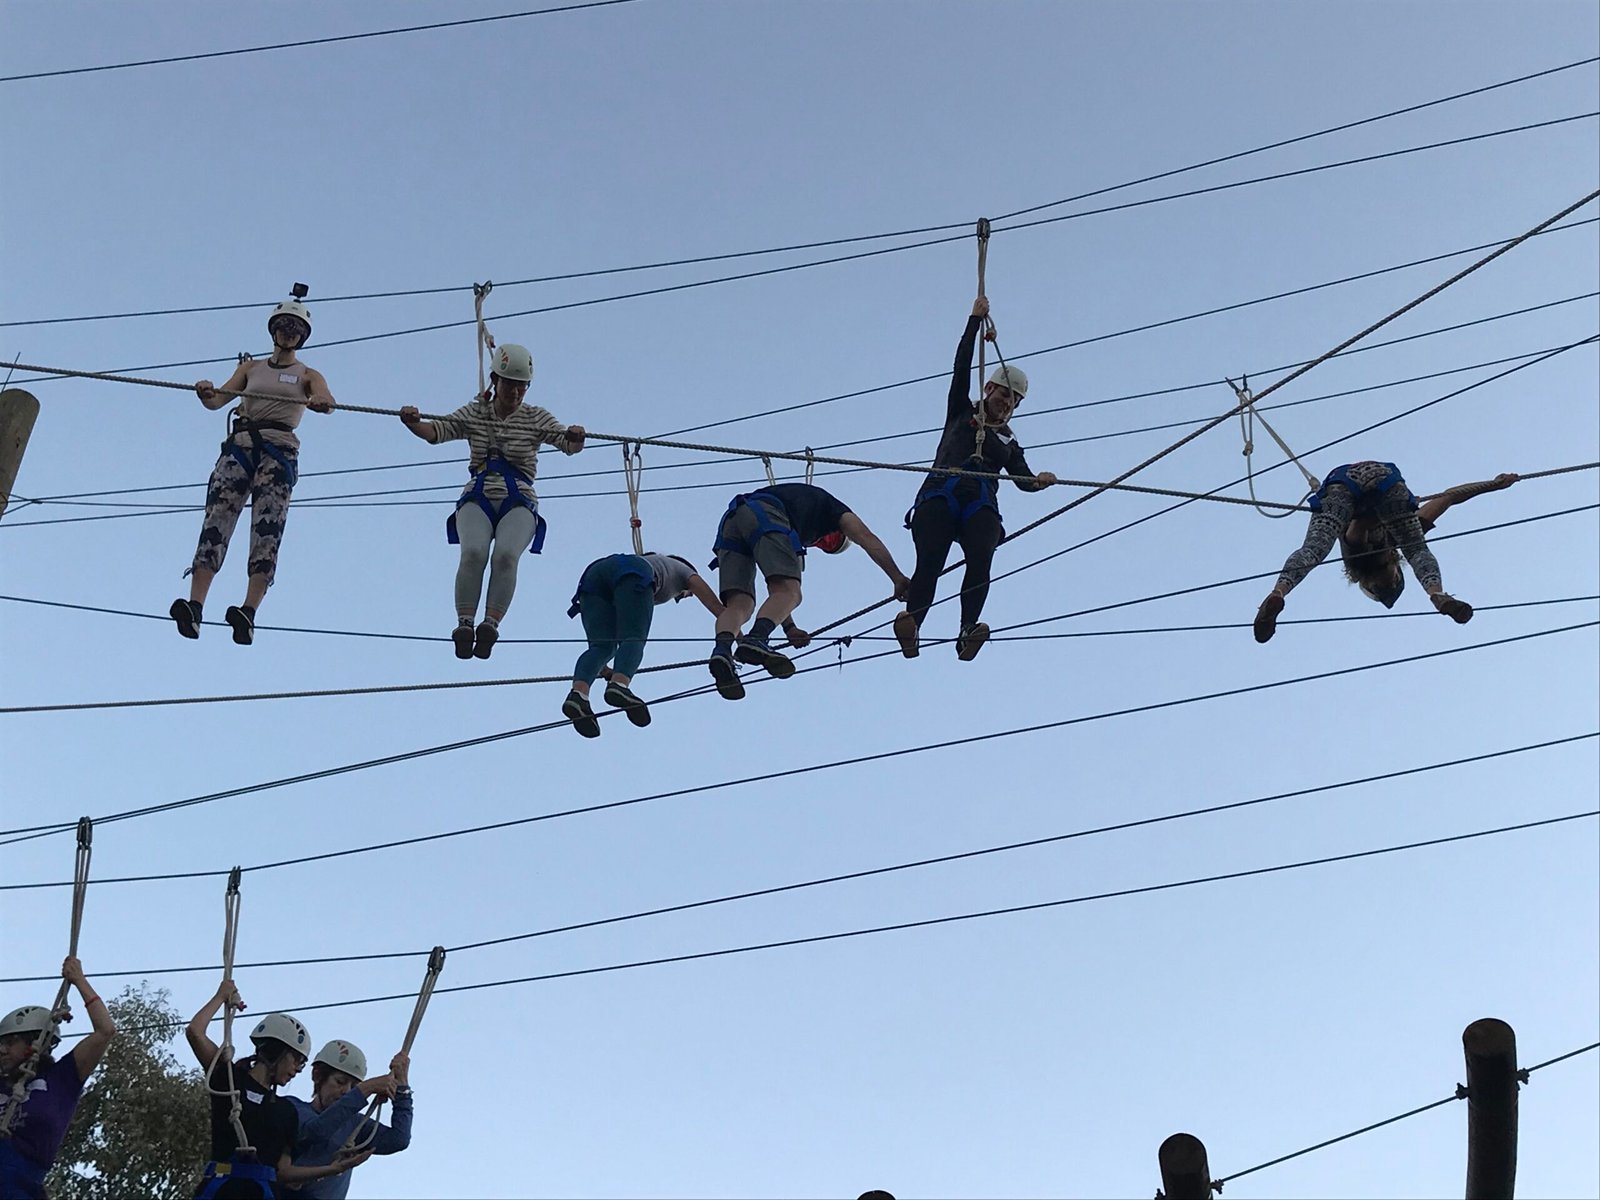 Trust on a Tightrope – Challenge your Team